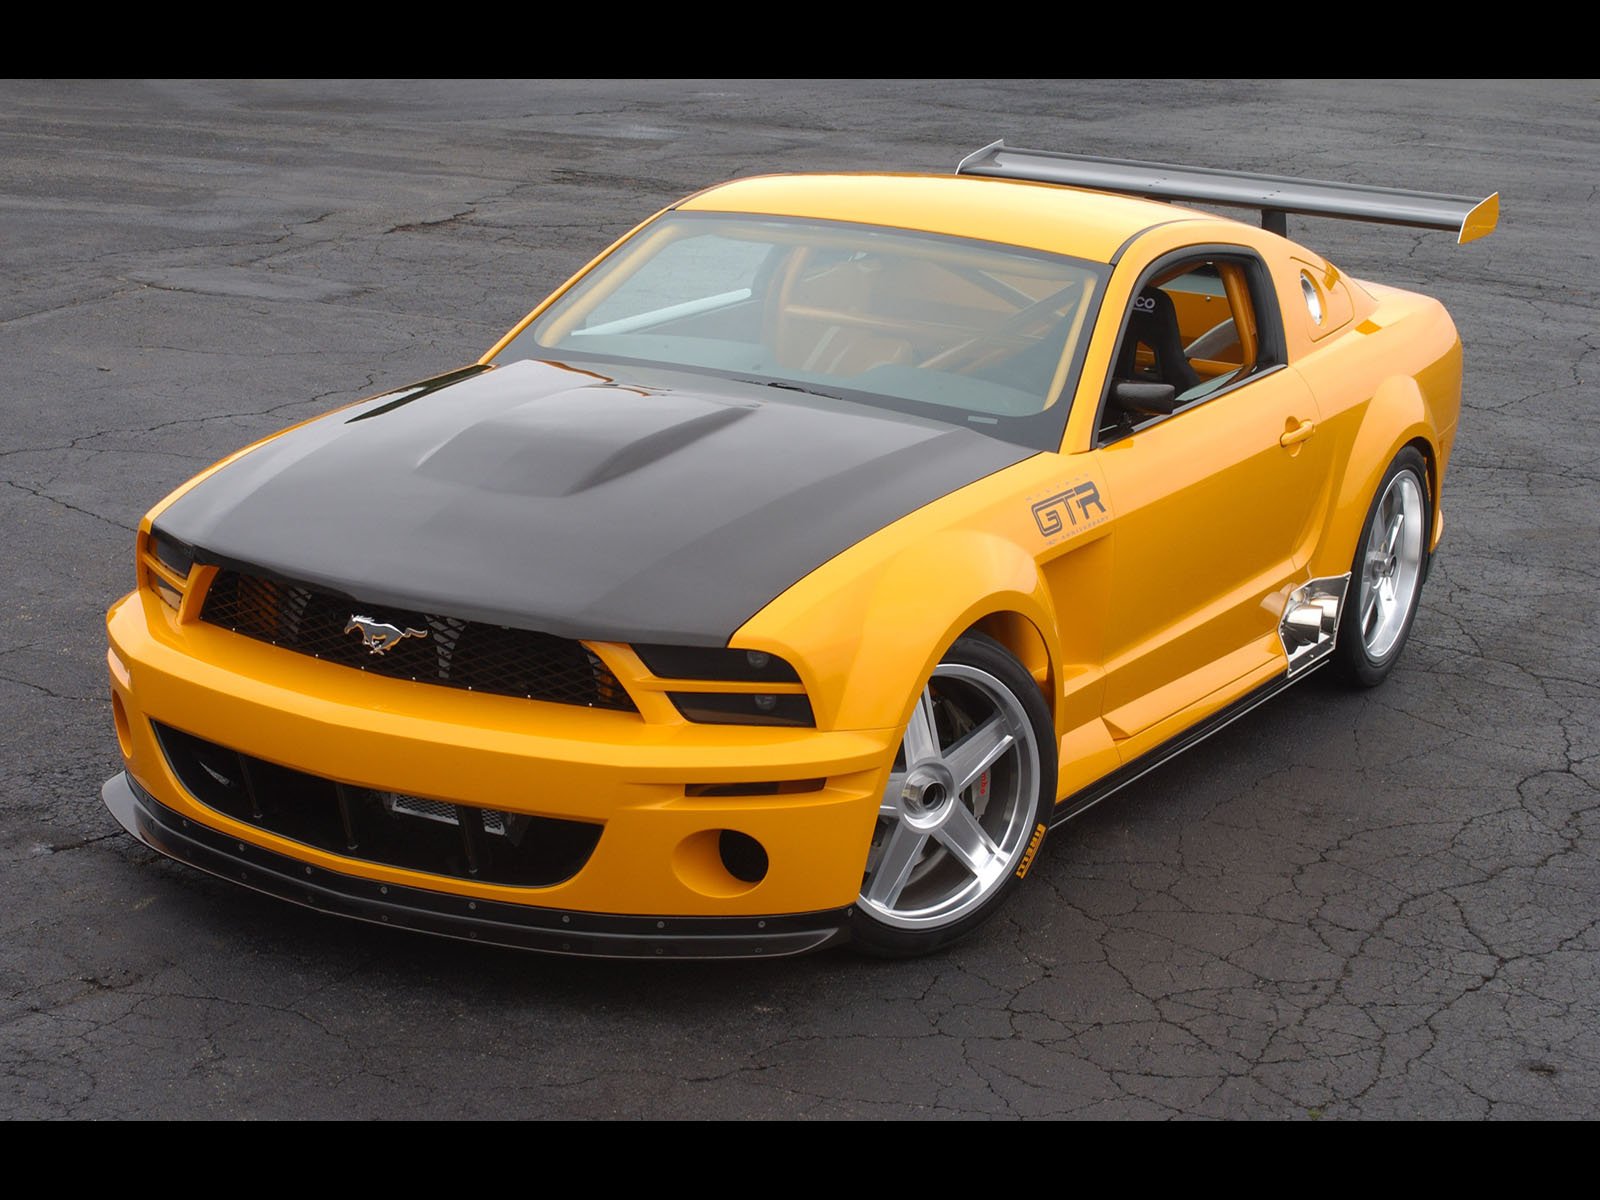 2004, Ford, Mustang, Gt r, Concept, Muscle, Supercar, Supercars Wallpaper